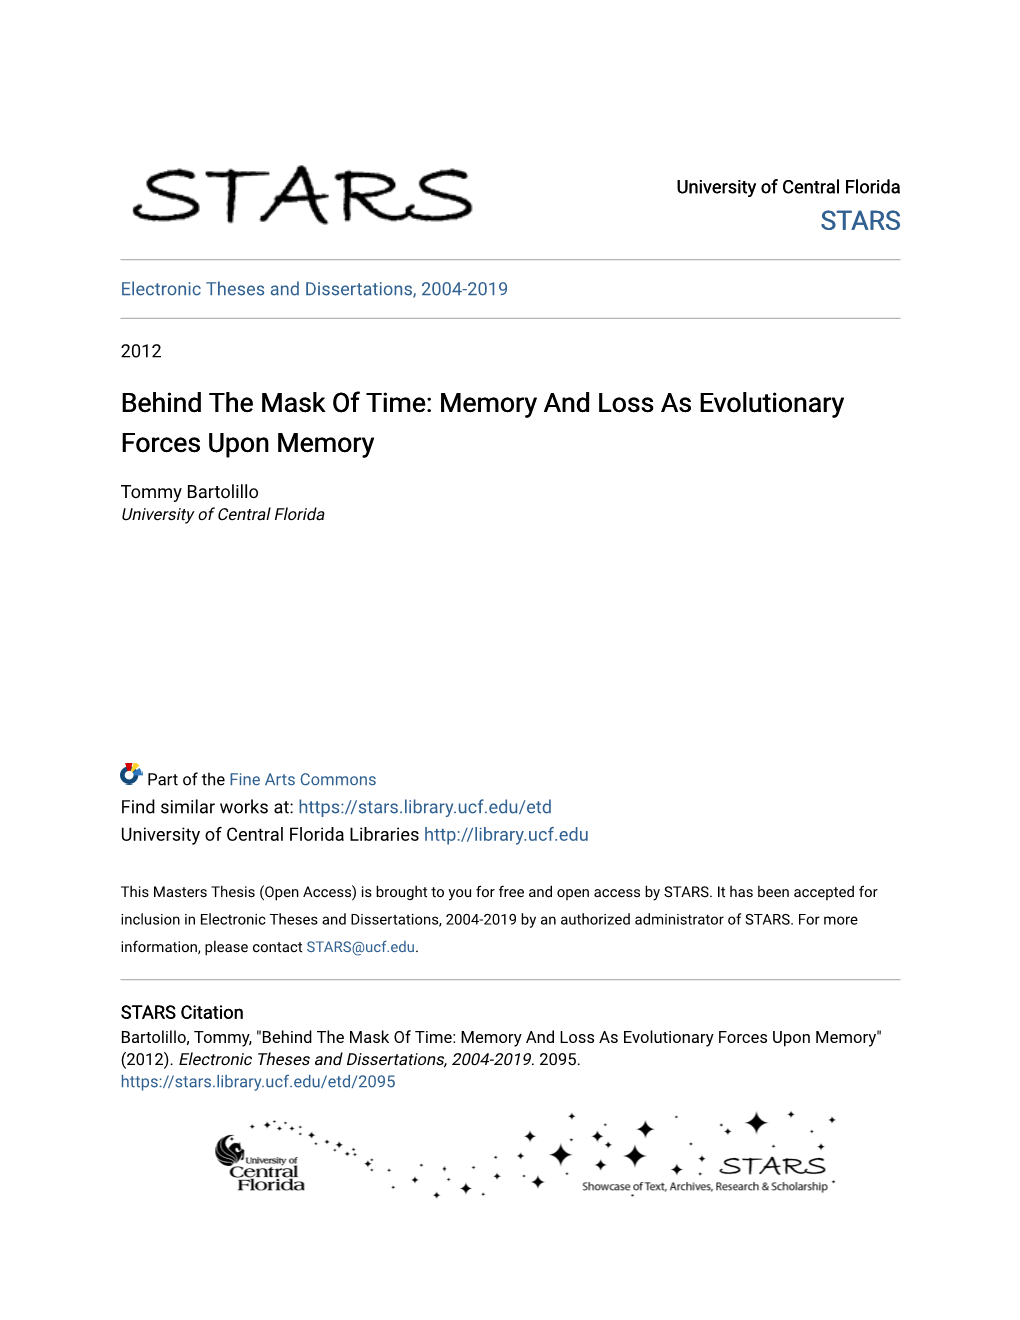 Behind the Mask of Time: Memory and Loss As Evolutionary Forces Upon Memory